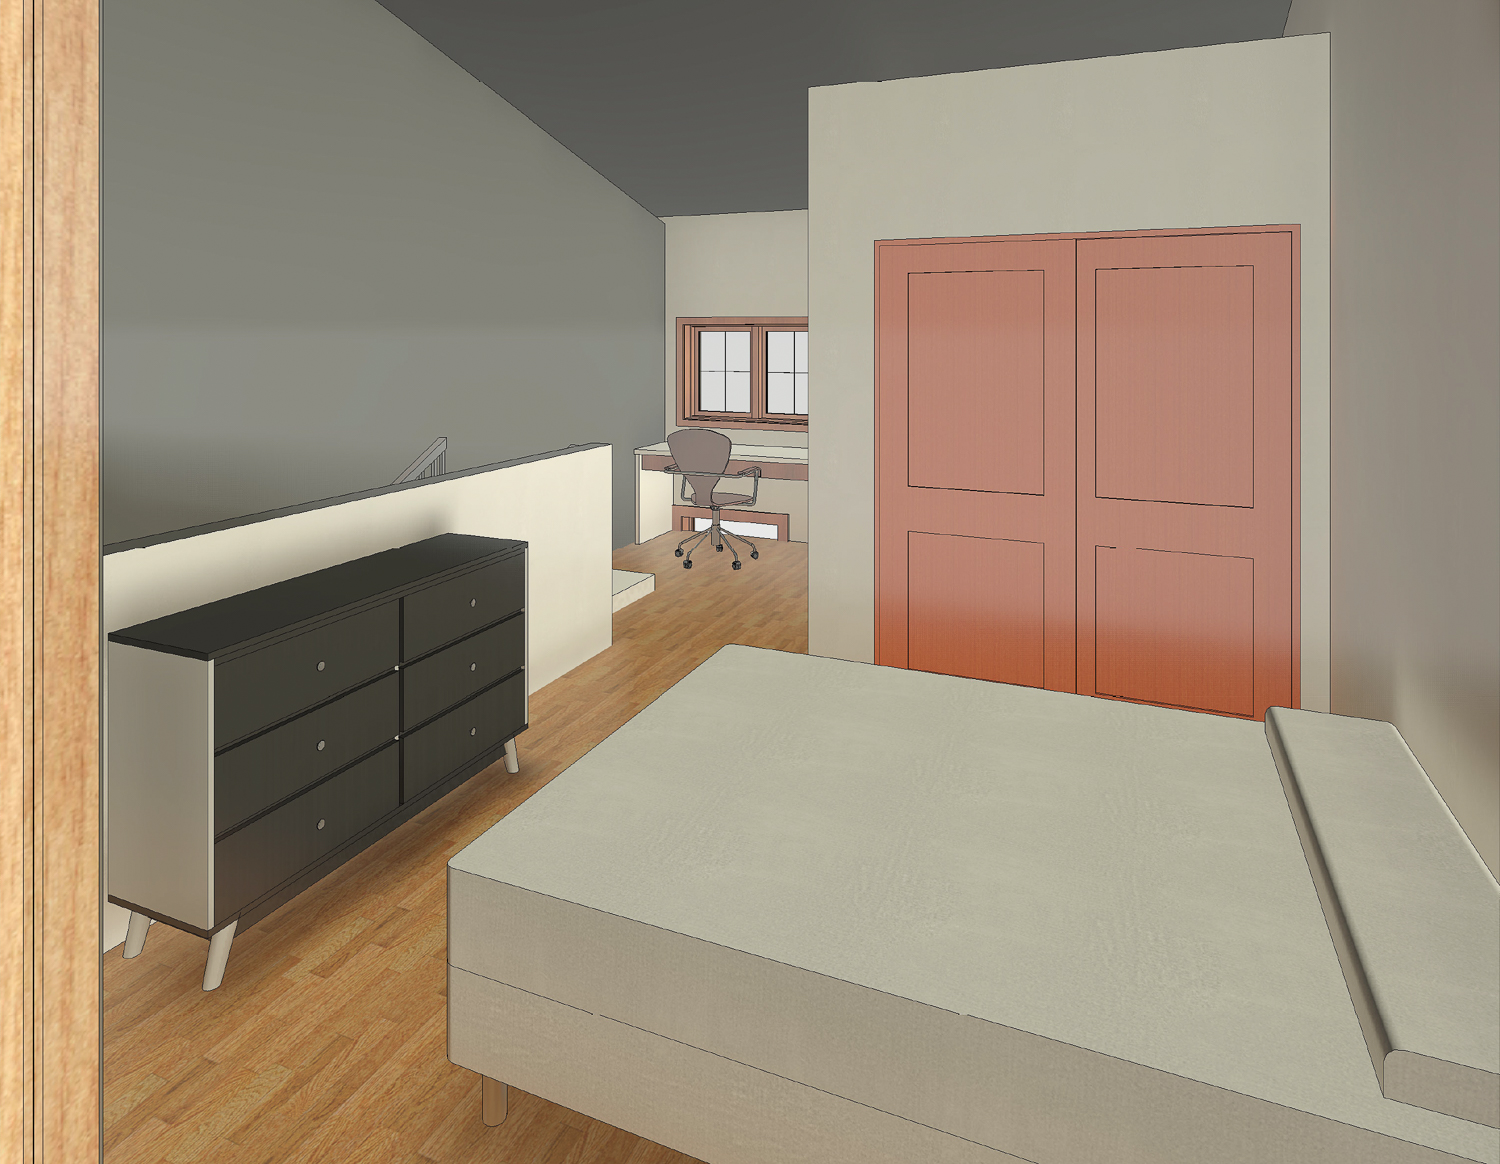 The Historic Alley Lofts and Studios interiors, rendering courtesy the Warren Trust